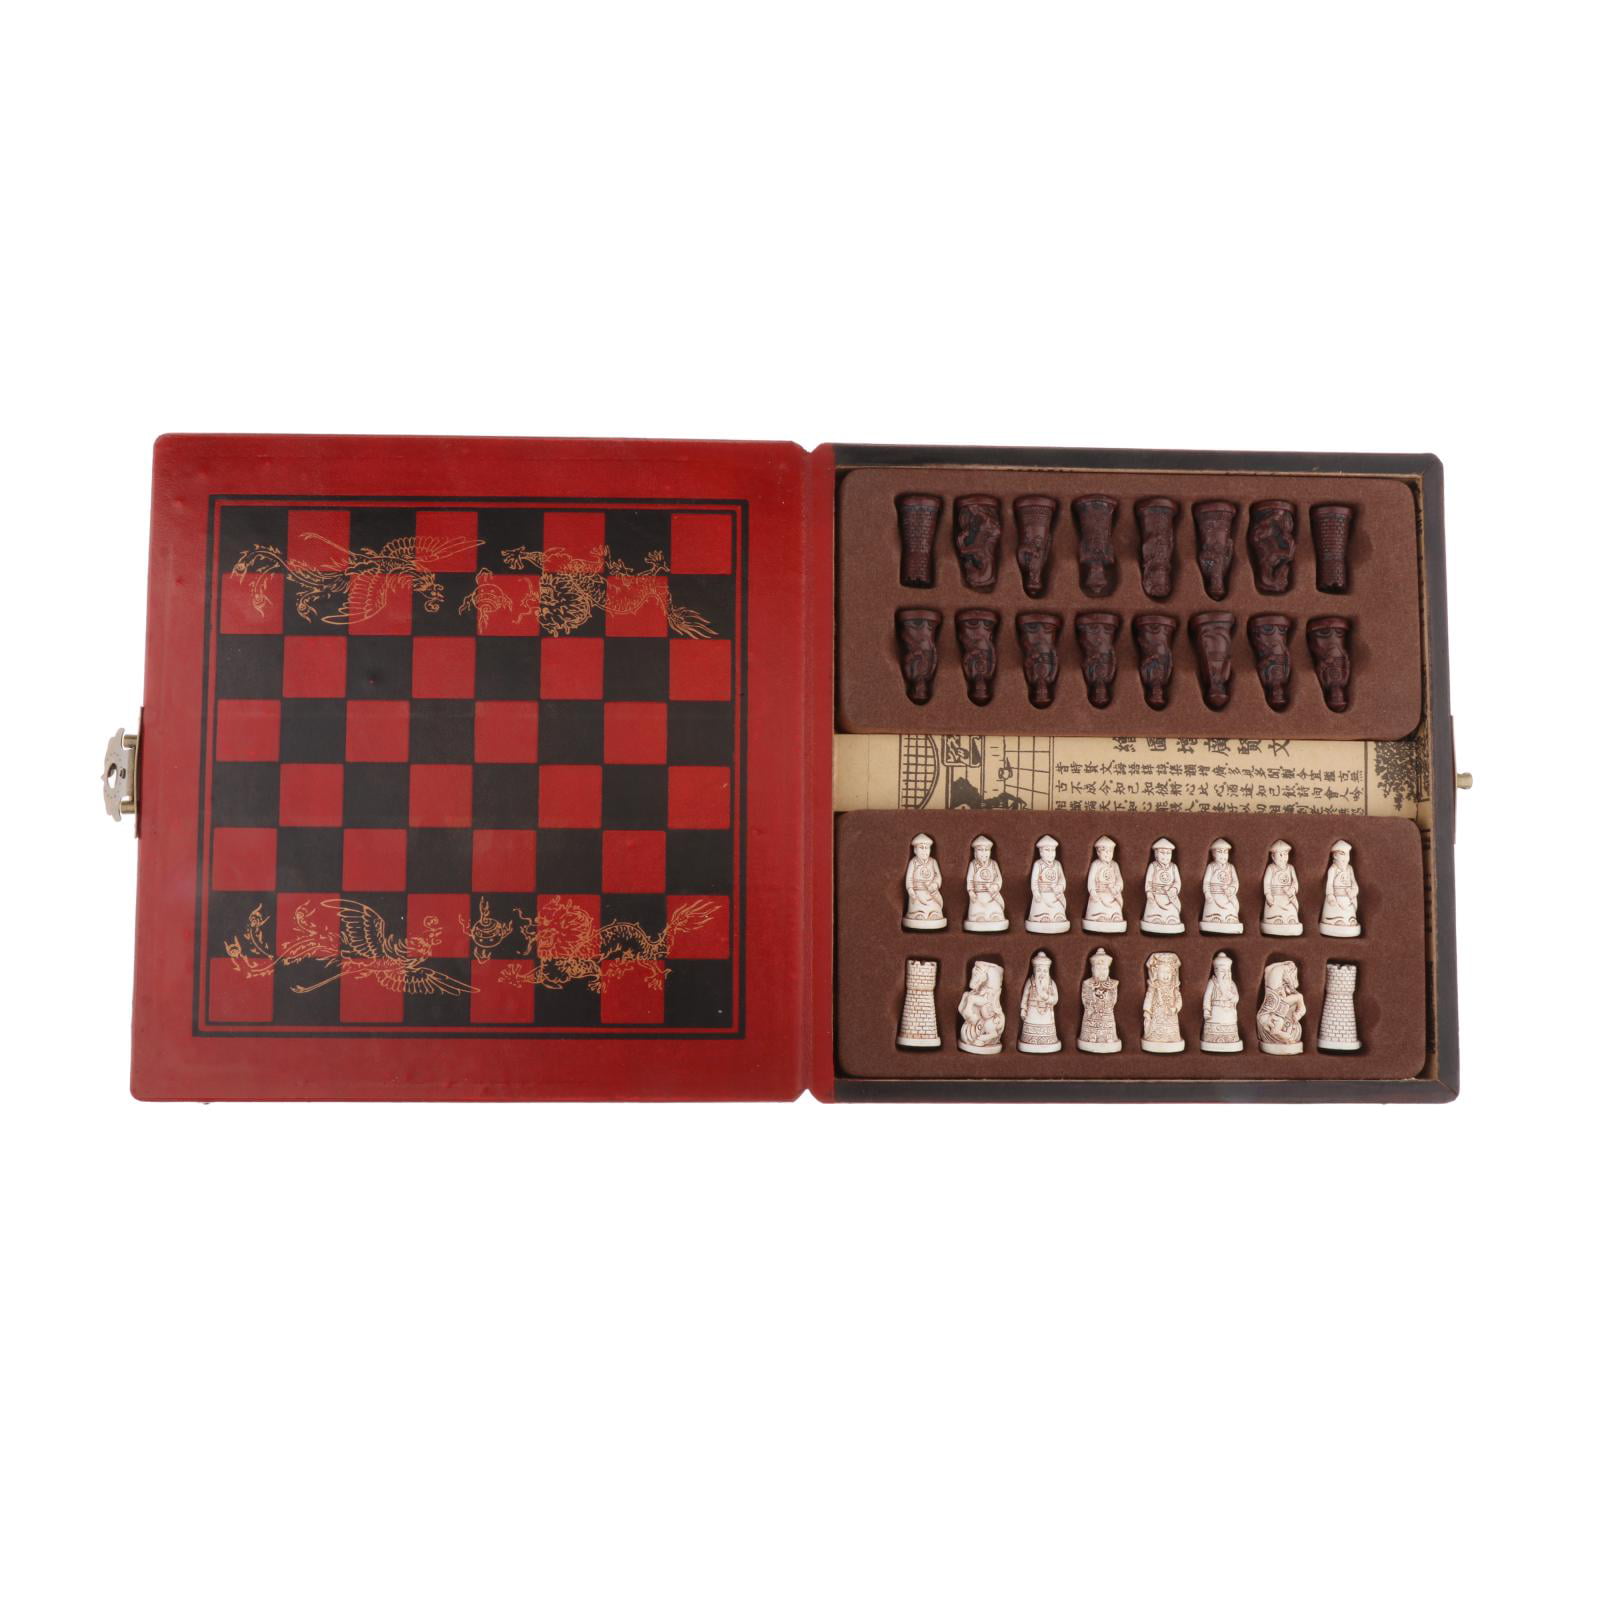 Foldable Vintage Chinese Chess Set Board Game Wood Chess Pieces Collectibles 